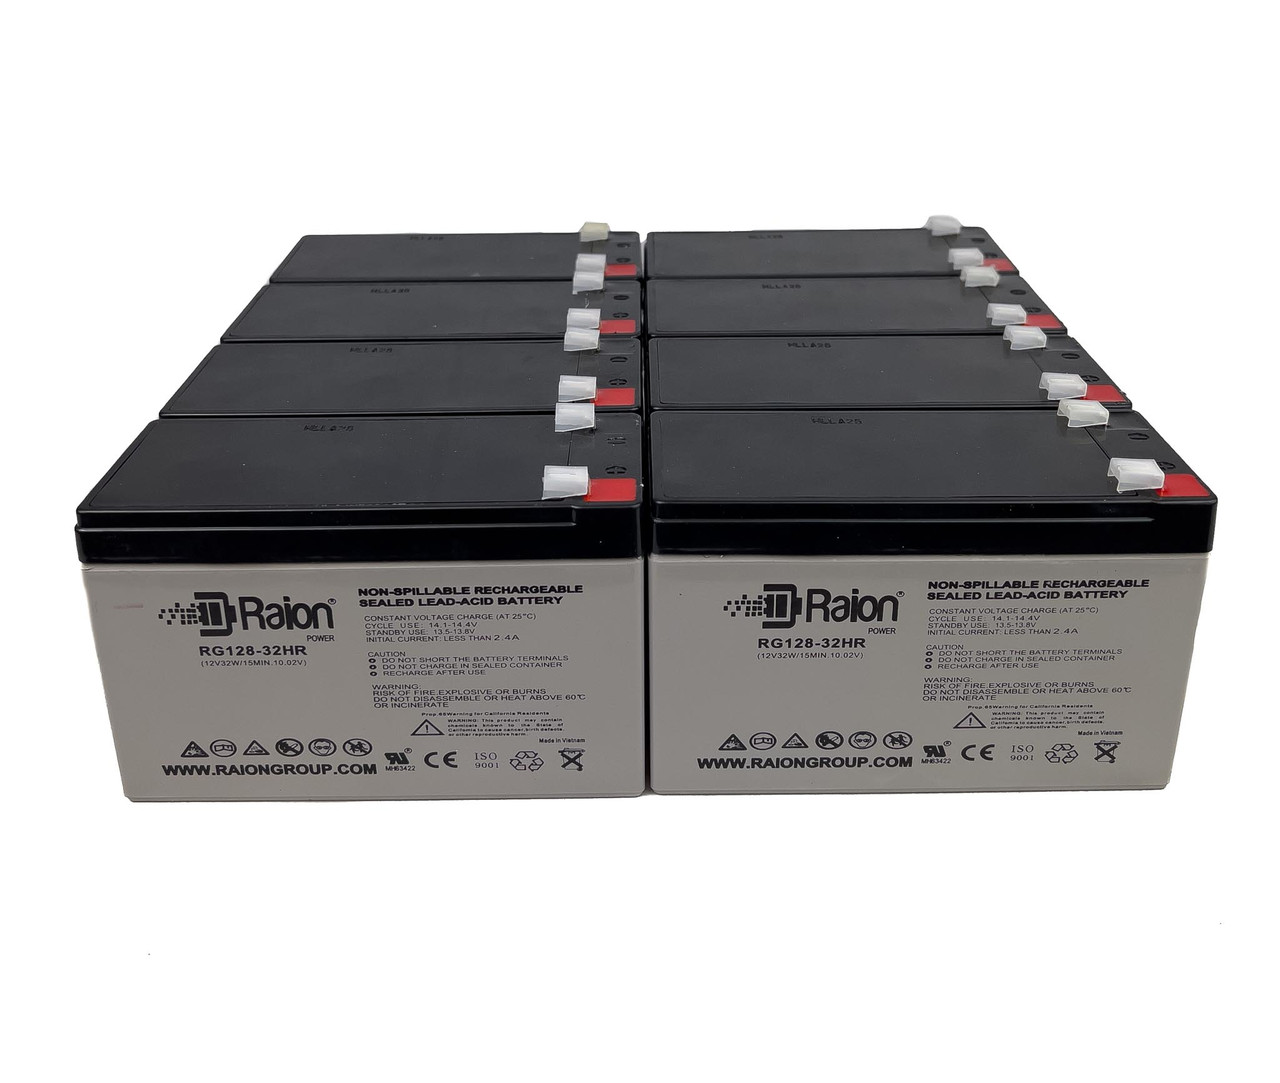 Raion Power 12V 7.5Ah High Rate Discharge UPS Batteries for Powerware 05146074-6591 - 8 Pack